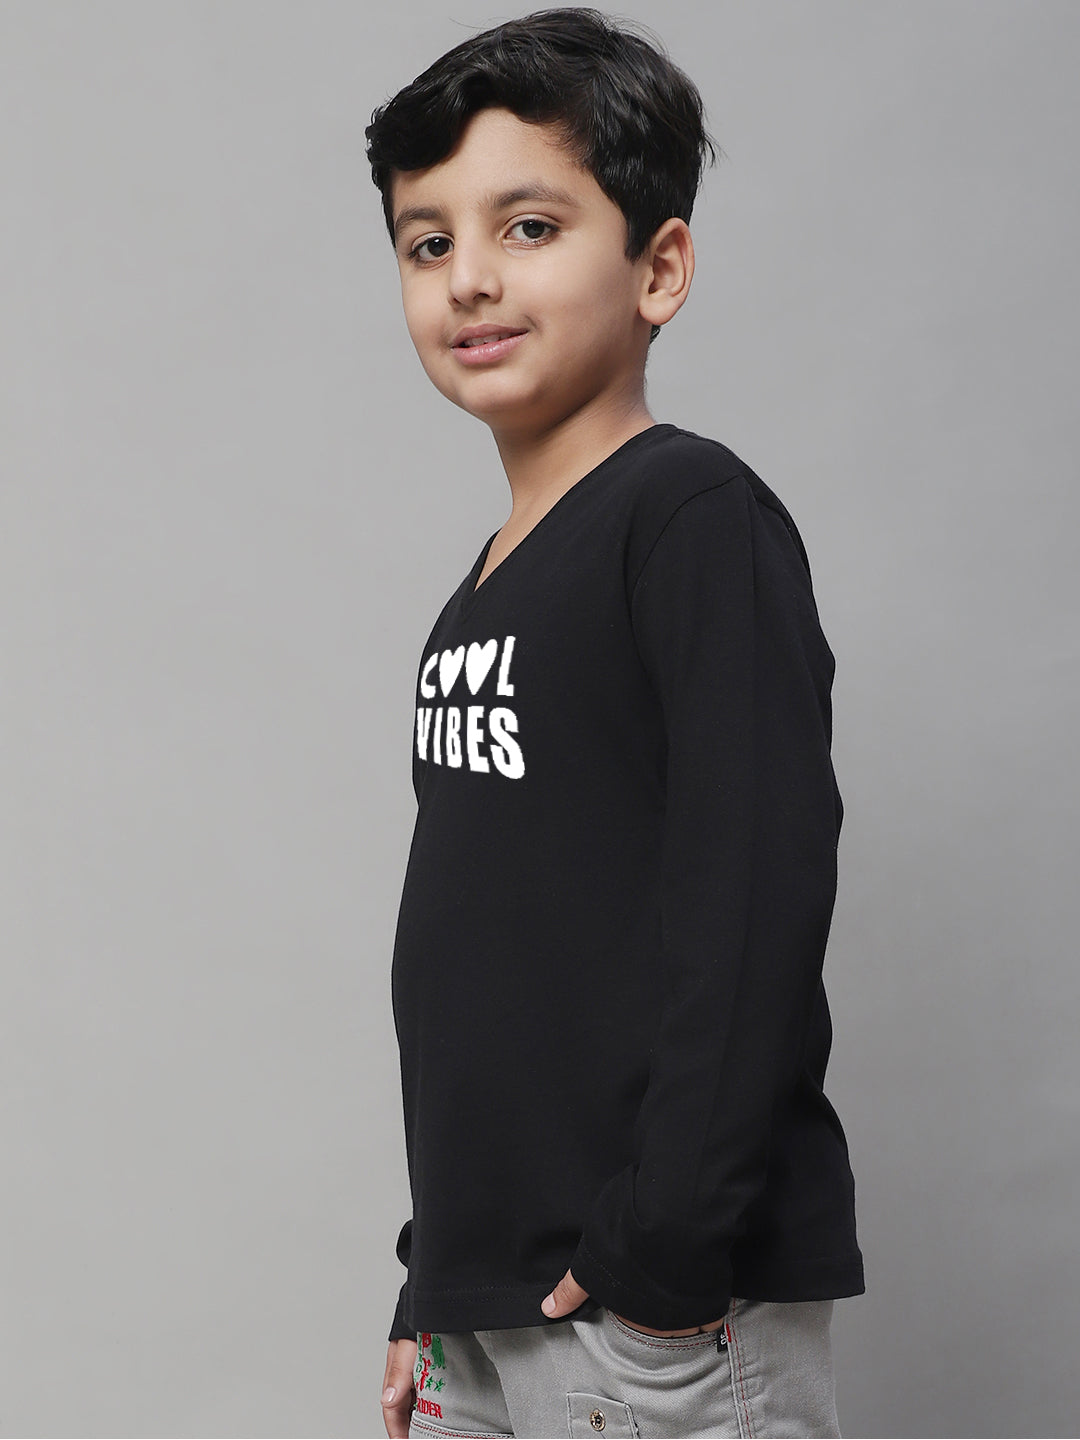 Boys Cool Vibes Casual Fit Printed T-Shirt - Friskers